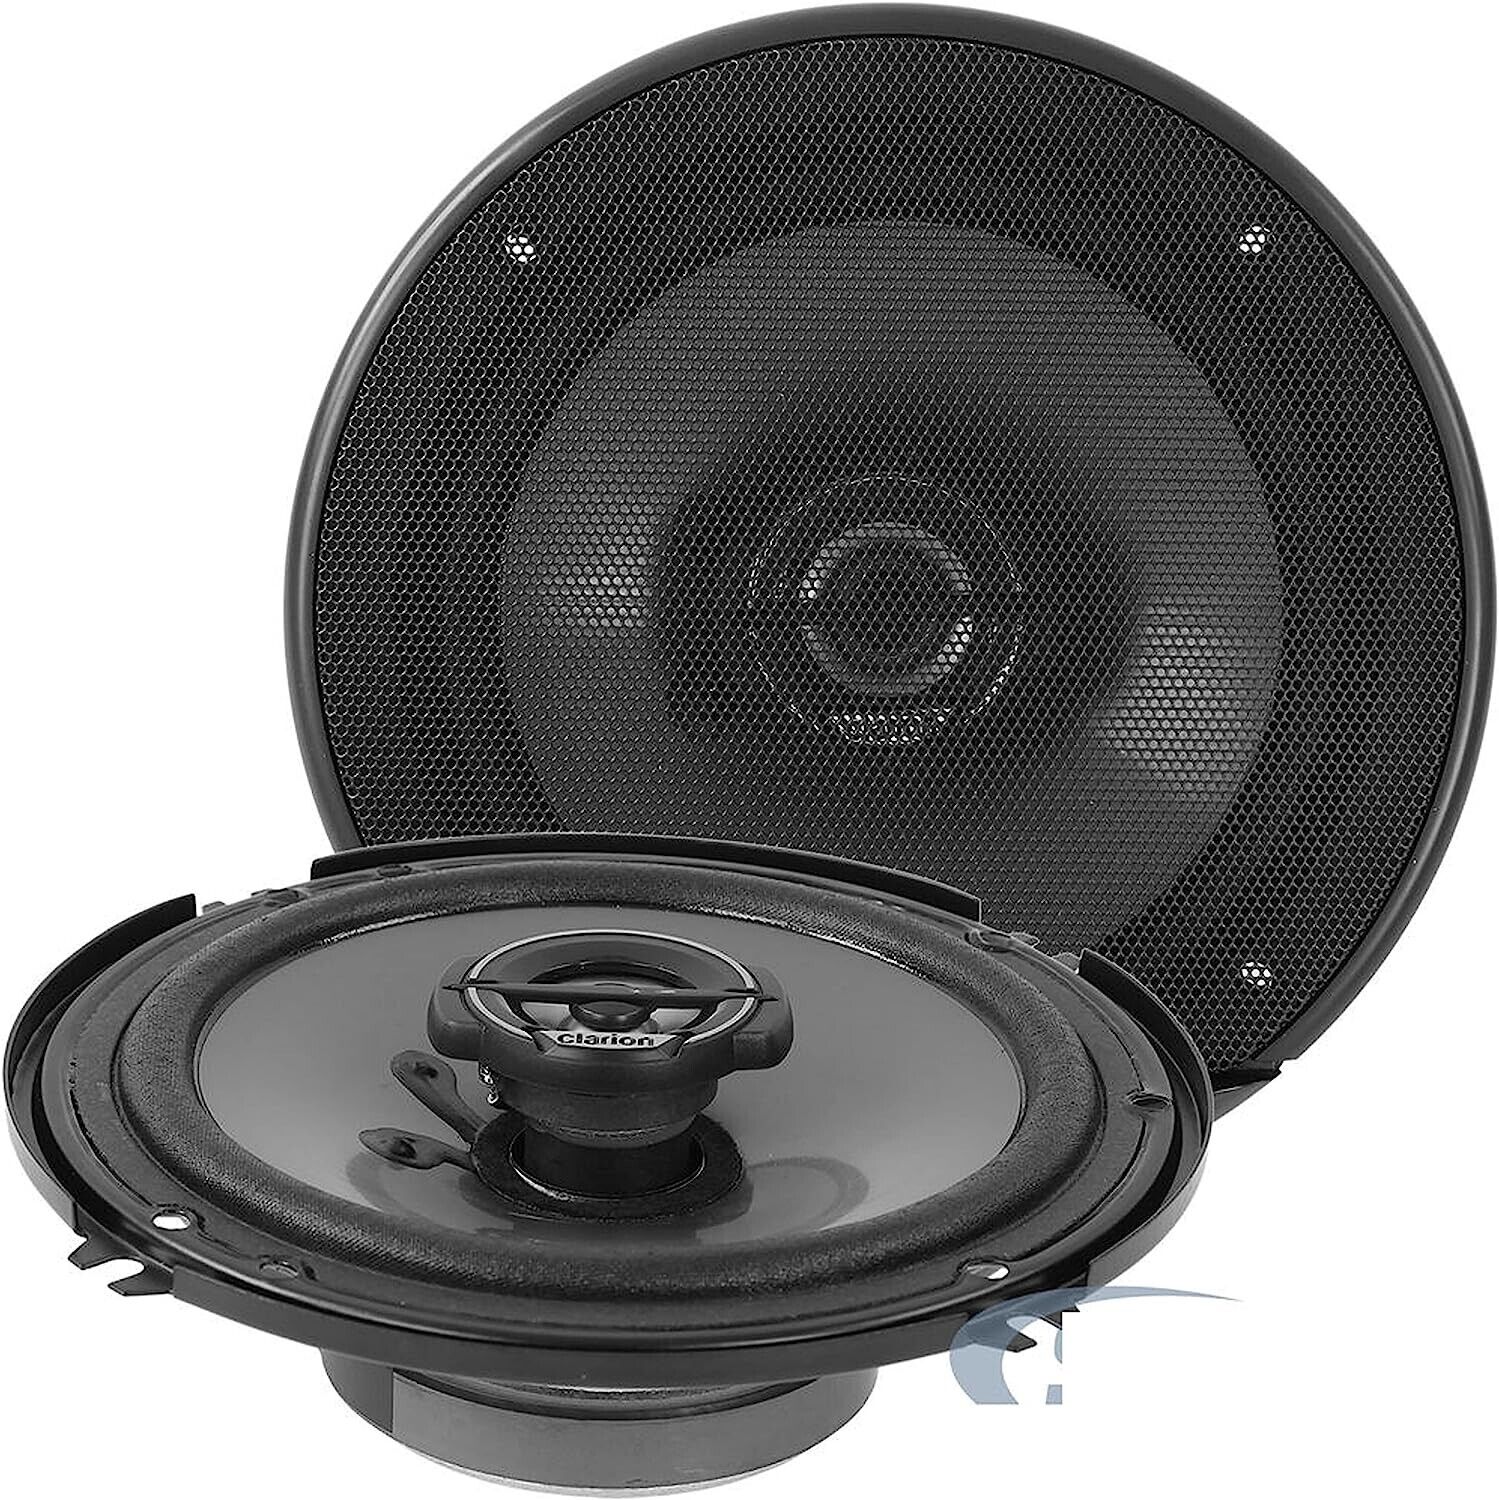 Clarion SRG1623R 80 Watts 6.5-Inch 2-Way SRG Series Car Audio Coaxial Speakers